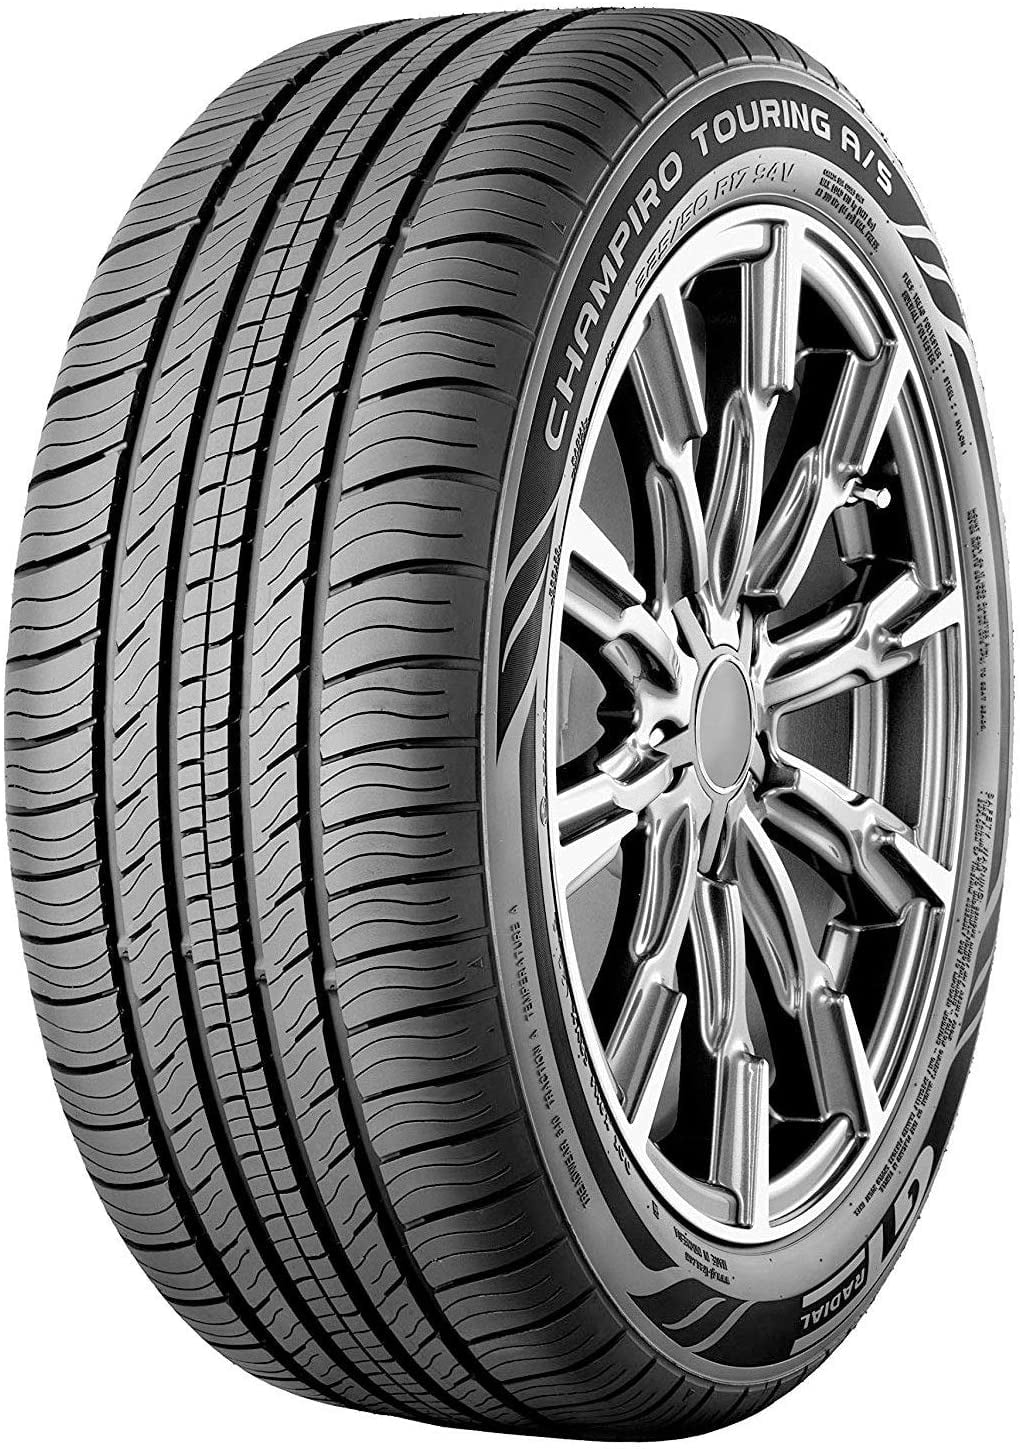 GT Radial Champiro Touring A/S 225/65R16 100 T Tire